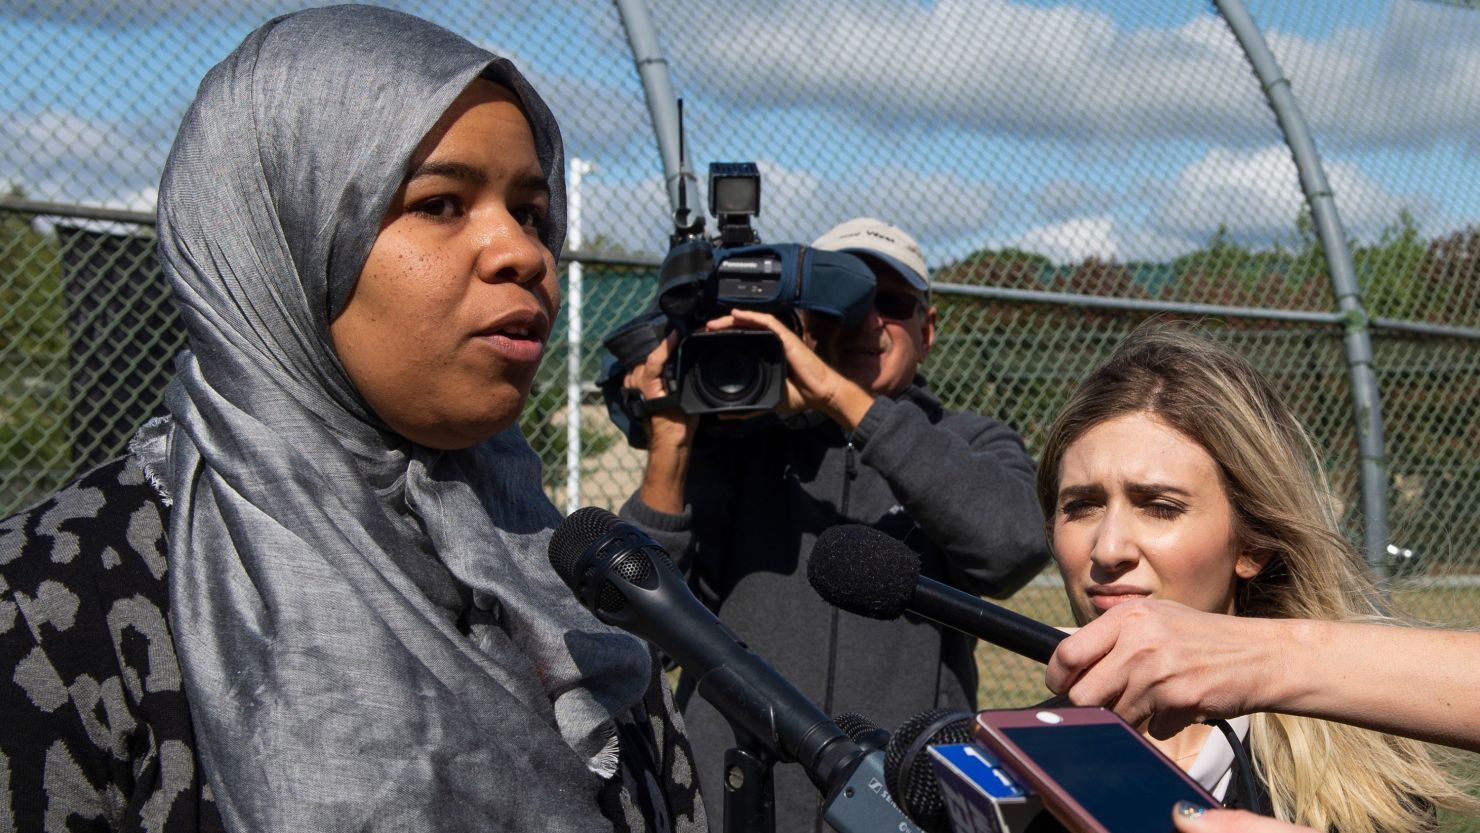 Madinah Brown, speaking to reporters Thursday, says her supervisors ask her to remove her hijab or go home